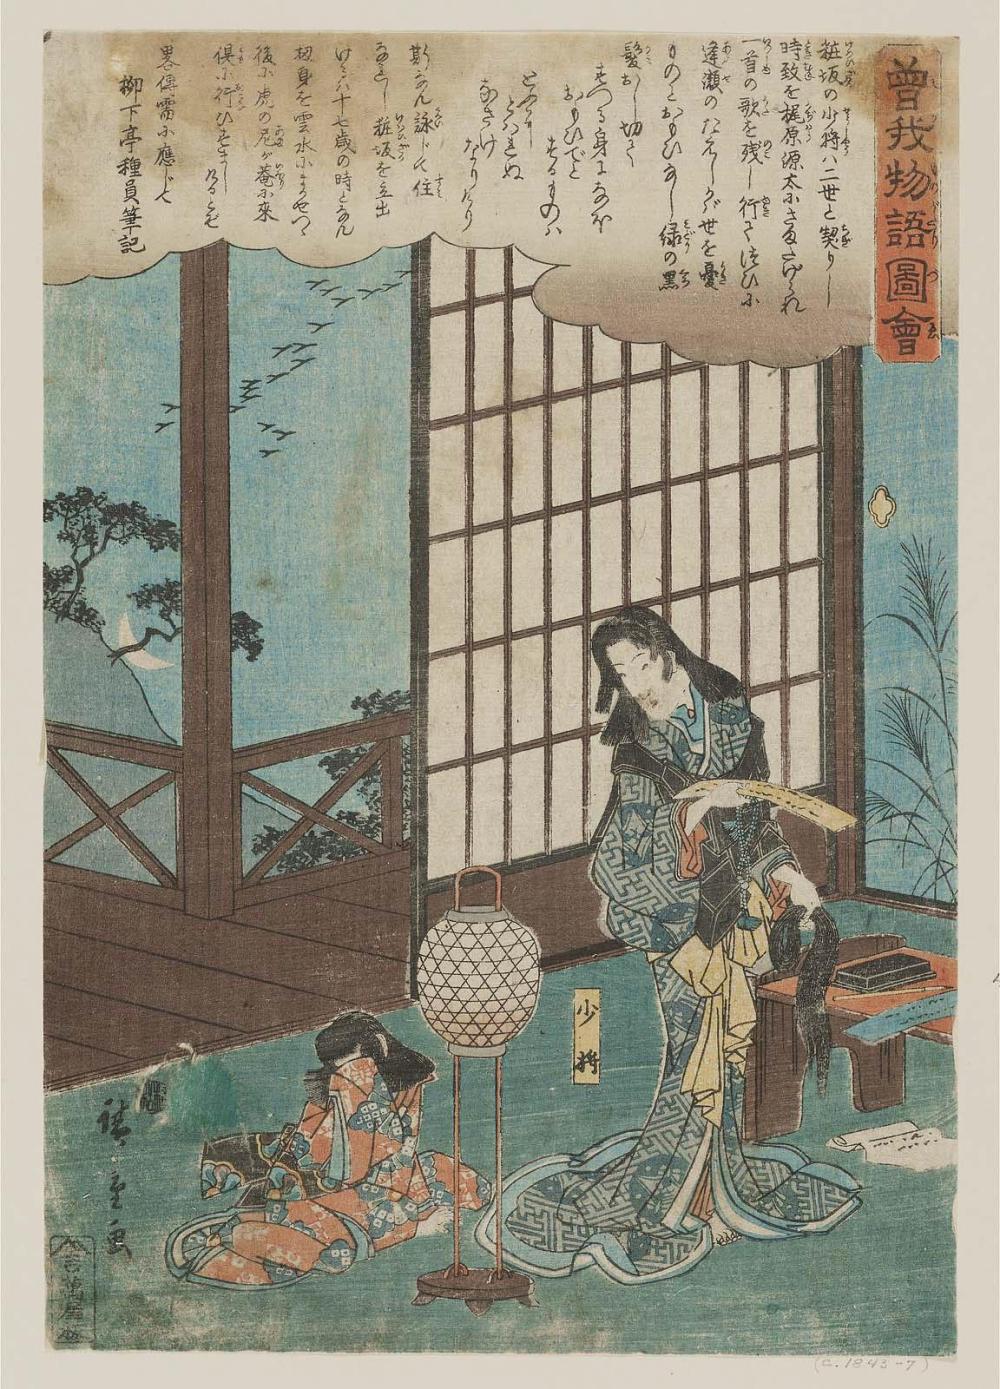 Shôshô, from the series Illustrated Tale of the Soga Brothers